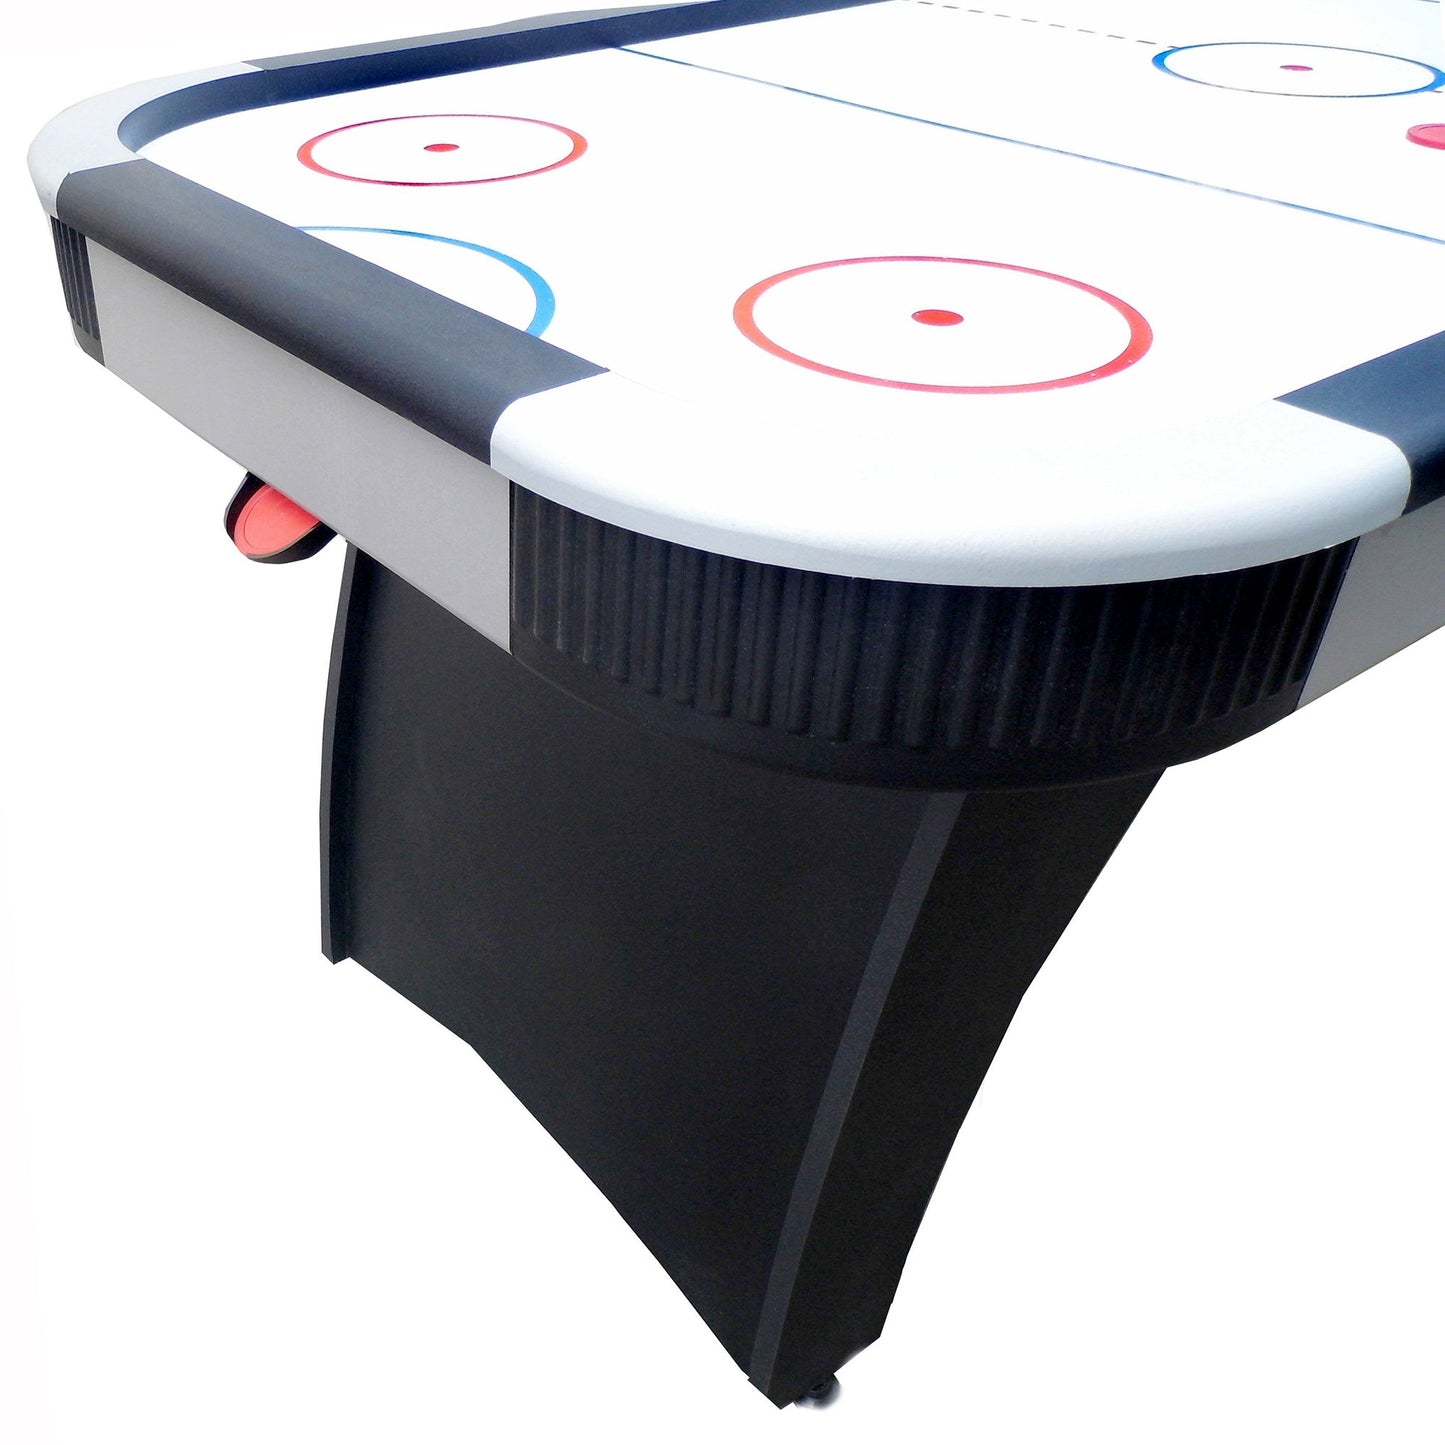 Hathaway Silverstreak 6ft Air Hockey Table with Electronic Scoring  - Gaming Blaze